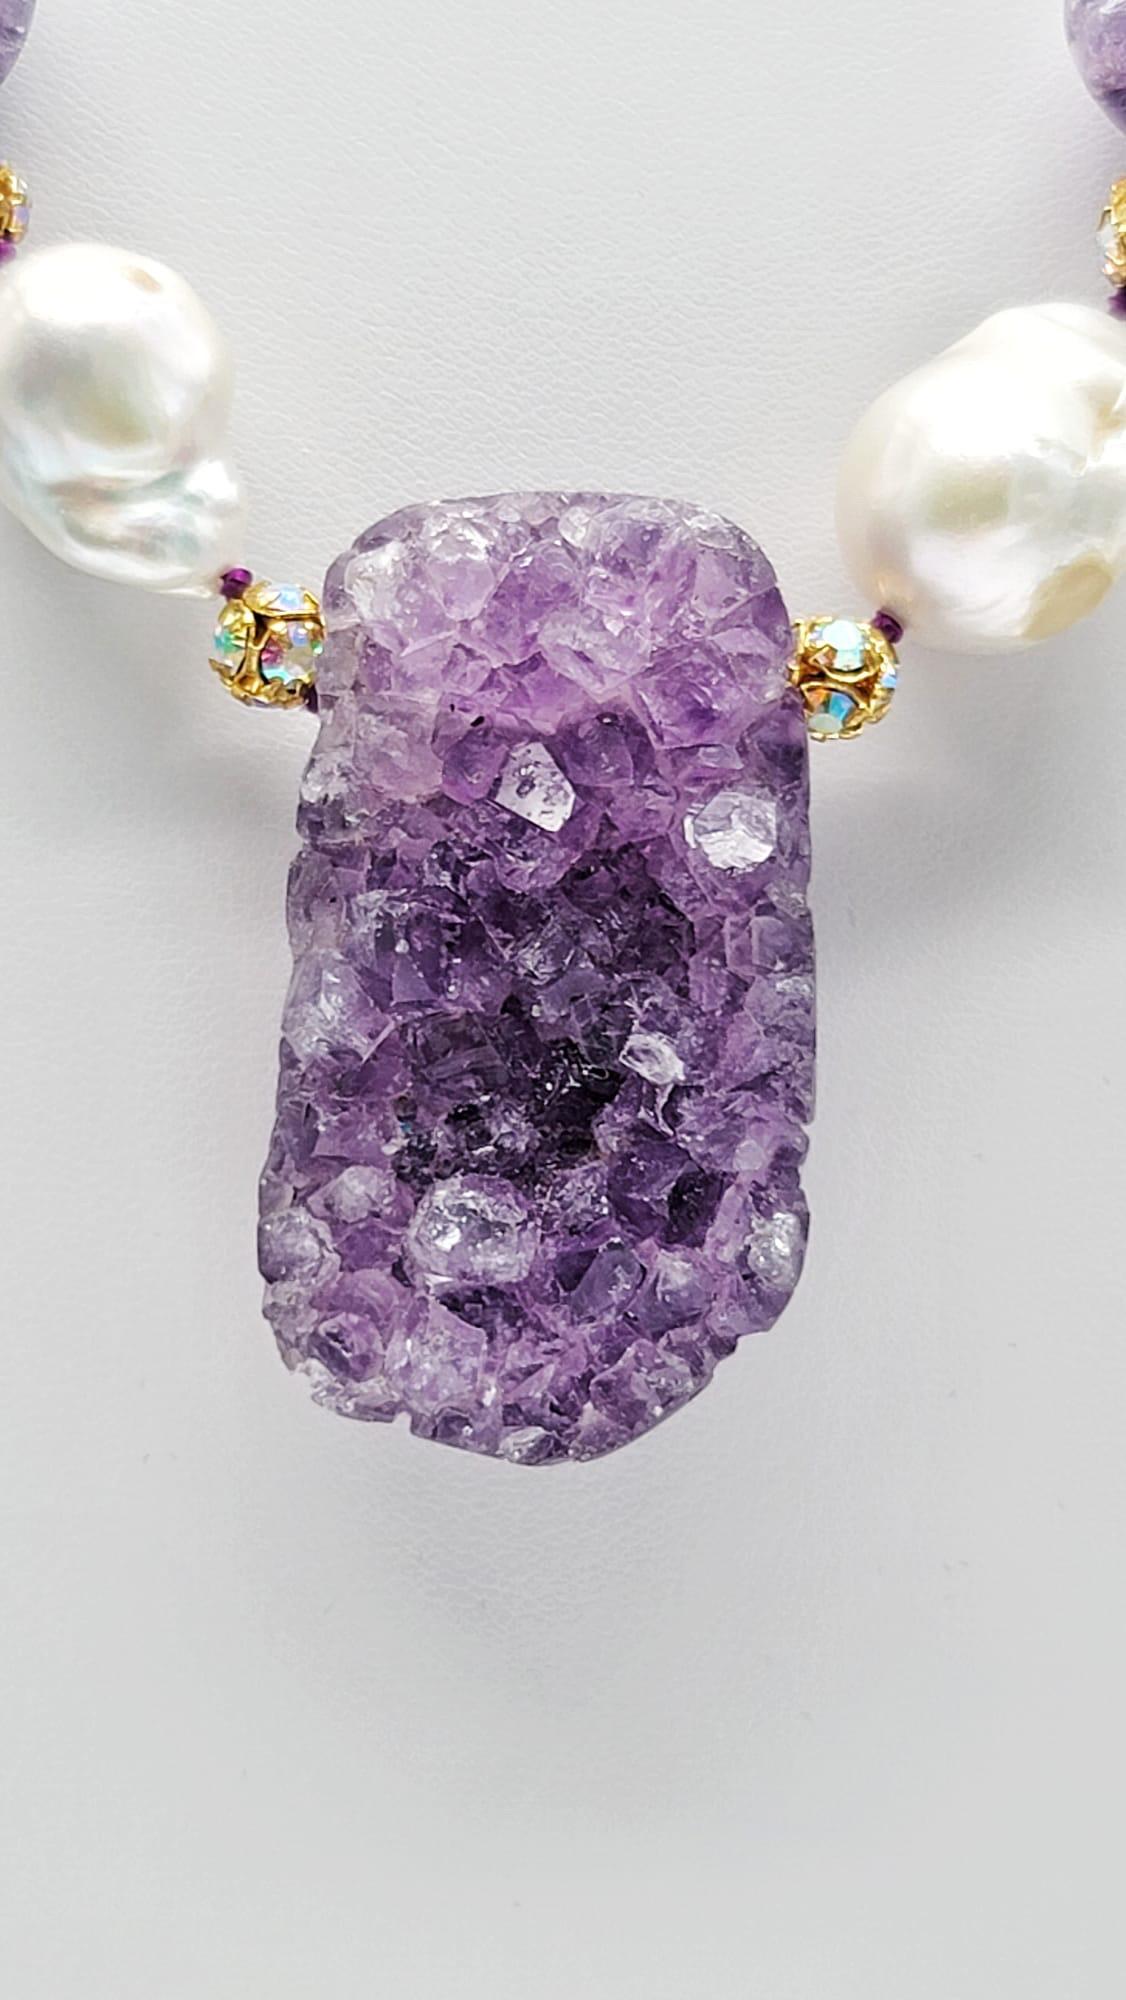 A.Jeschel Spectacular Amethyst Geodes and Baroque Pearl Necklace In New Condition For Sale In Miami, FL